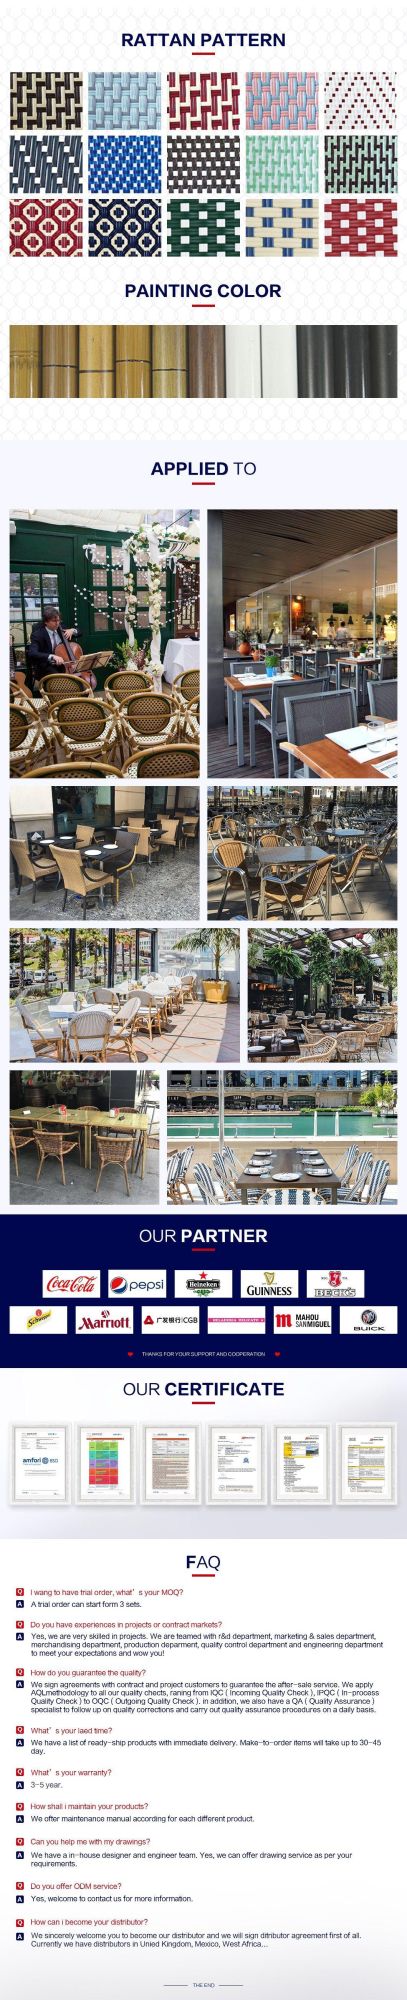 China Latest Leisure Waterproof Bistro Terrace Forest Round Rattan Outdoor Furniture Chair